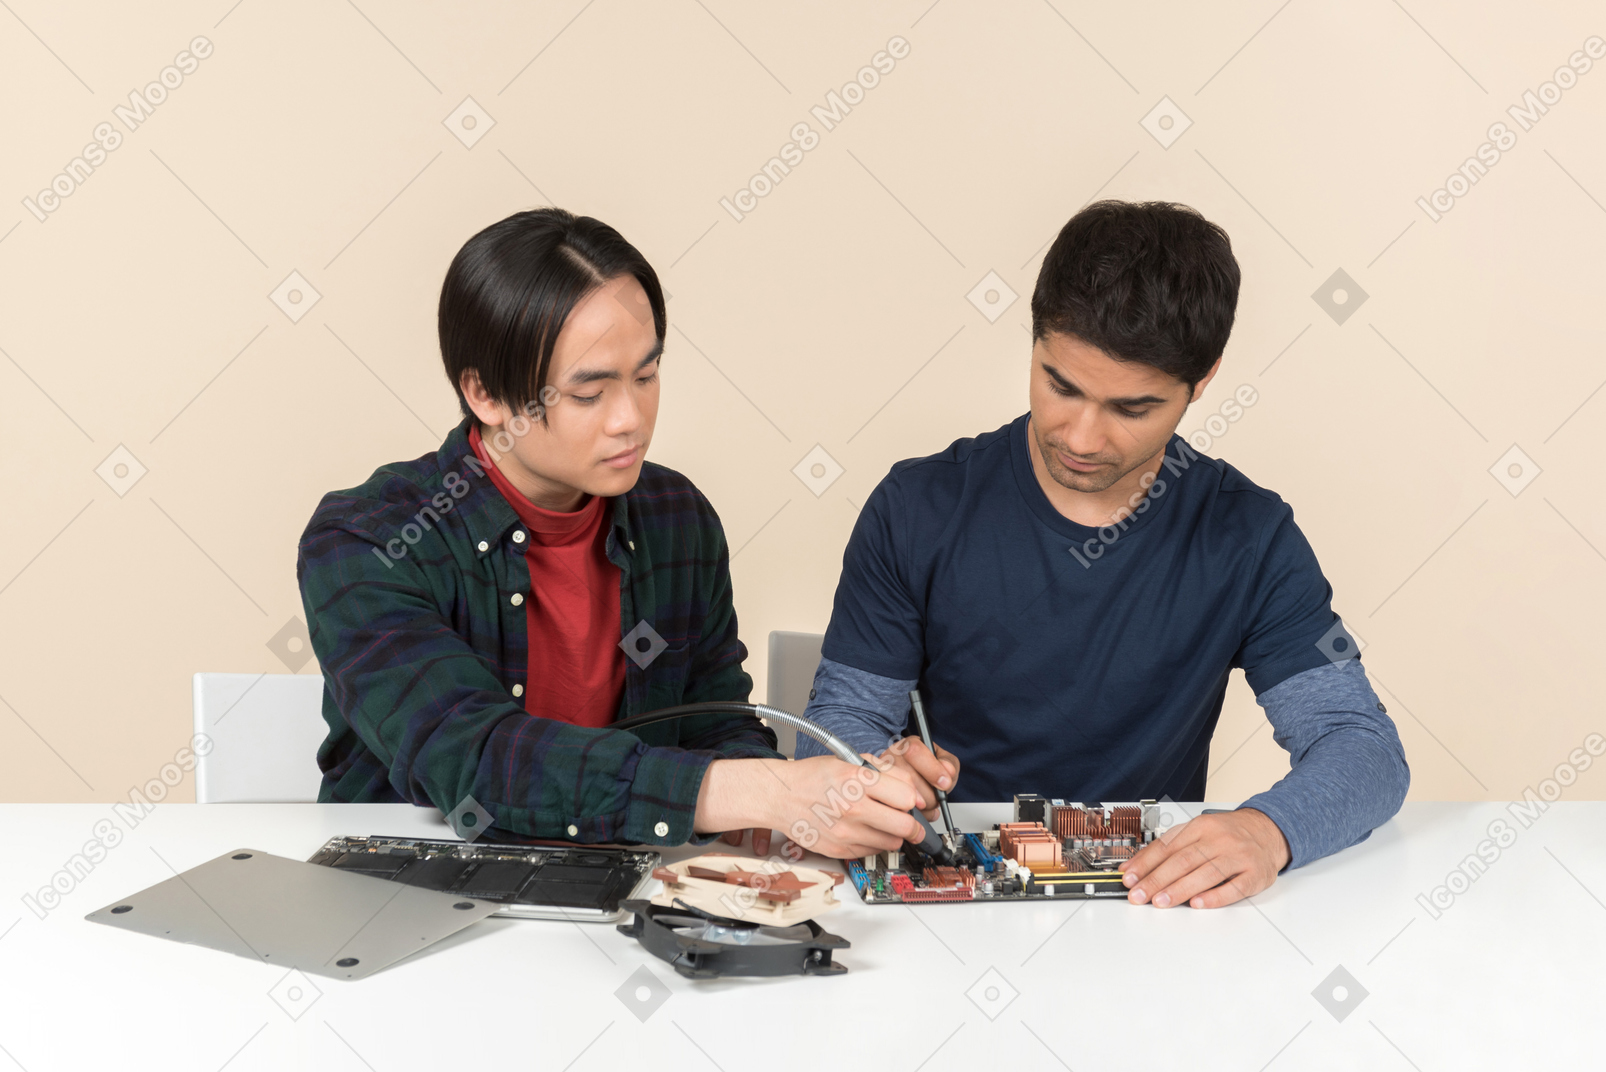 Two young geeks with some details on the table having some issues